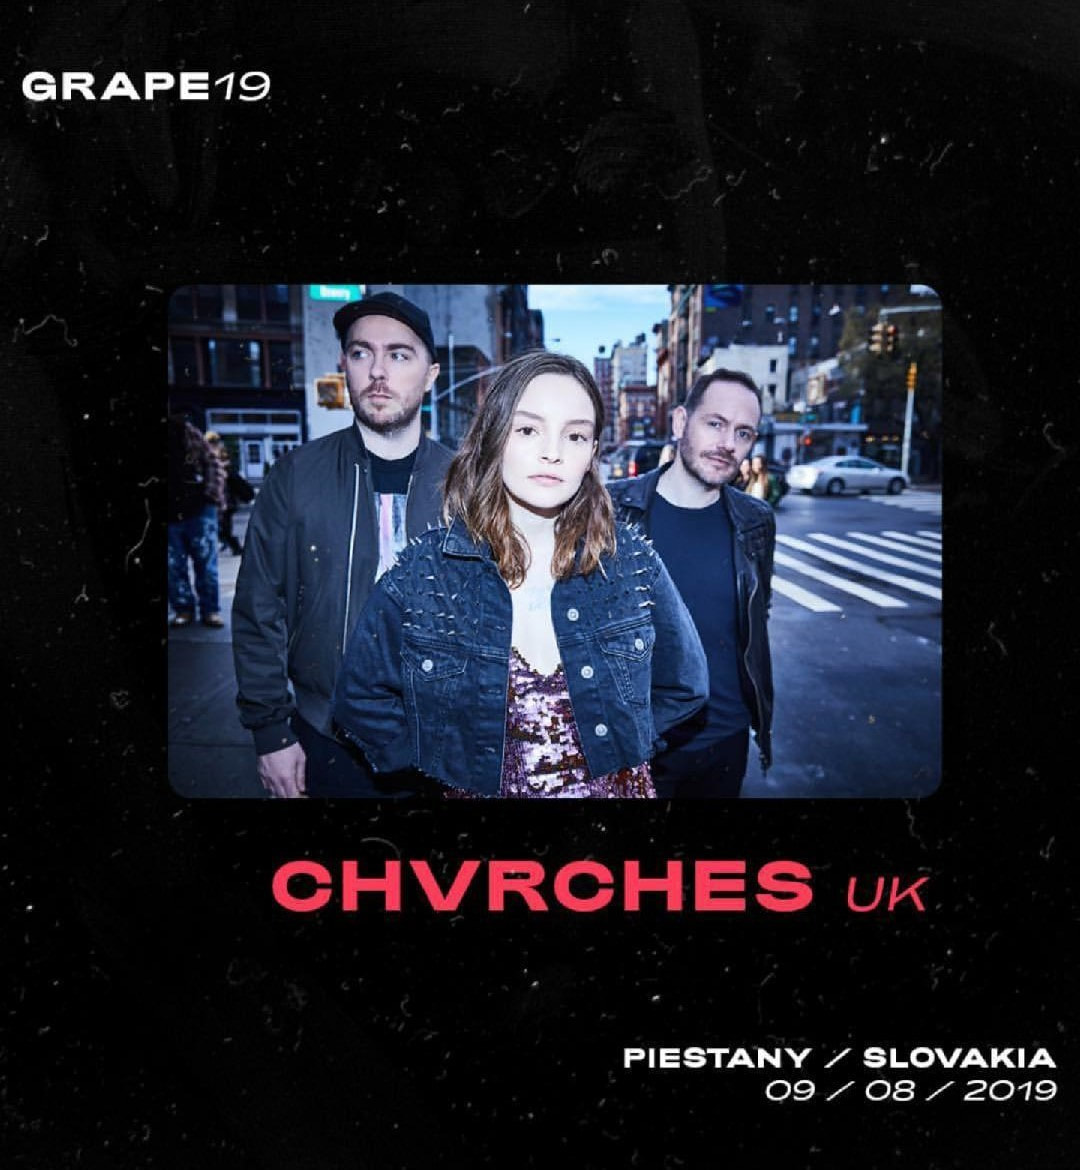 CHVRCHES Are Headed to Slovakia for Grape Festival Next Year